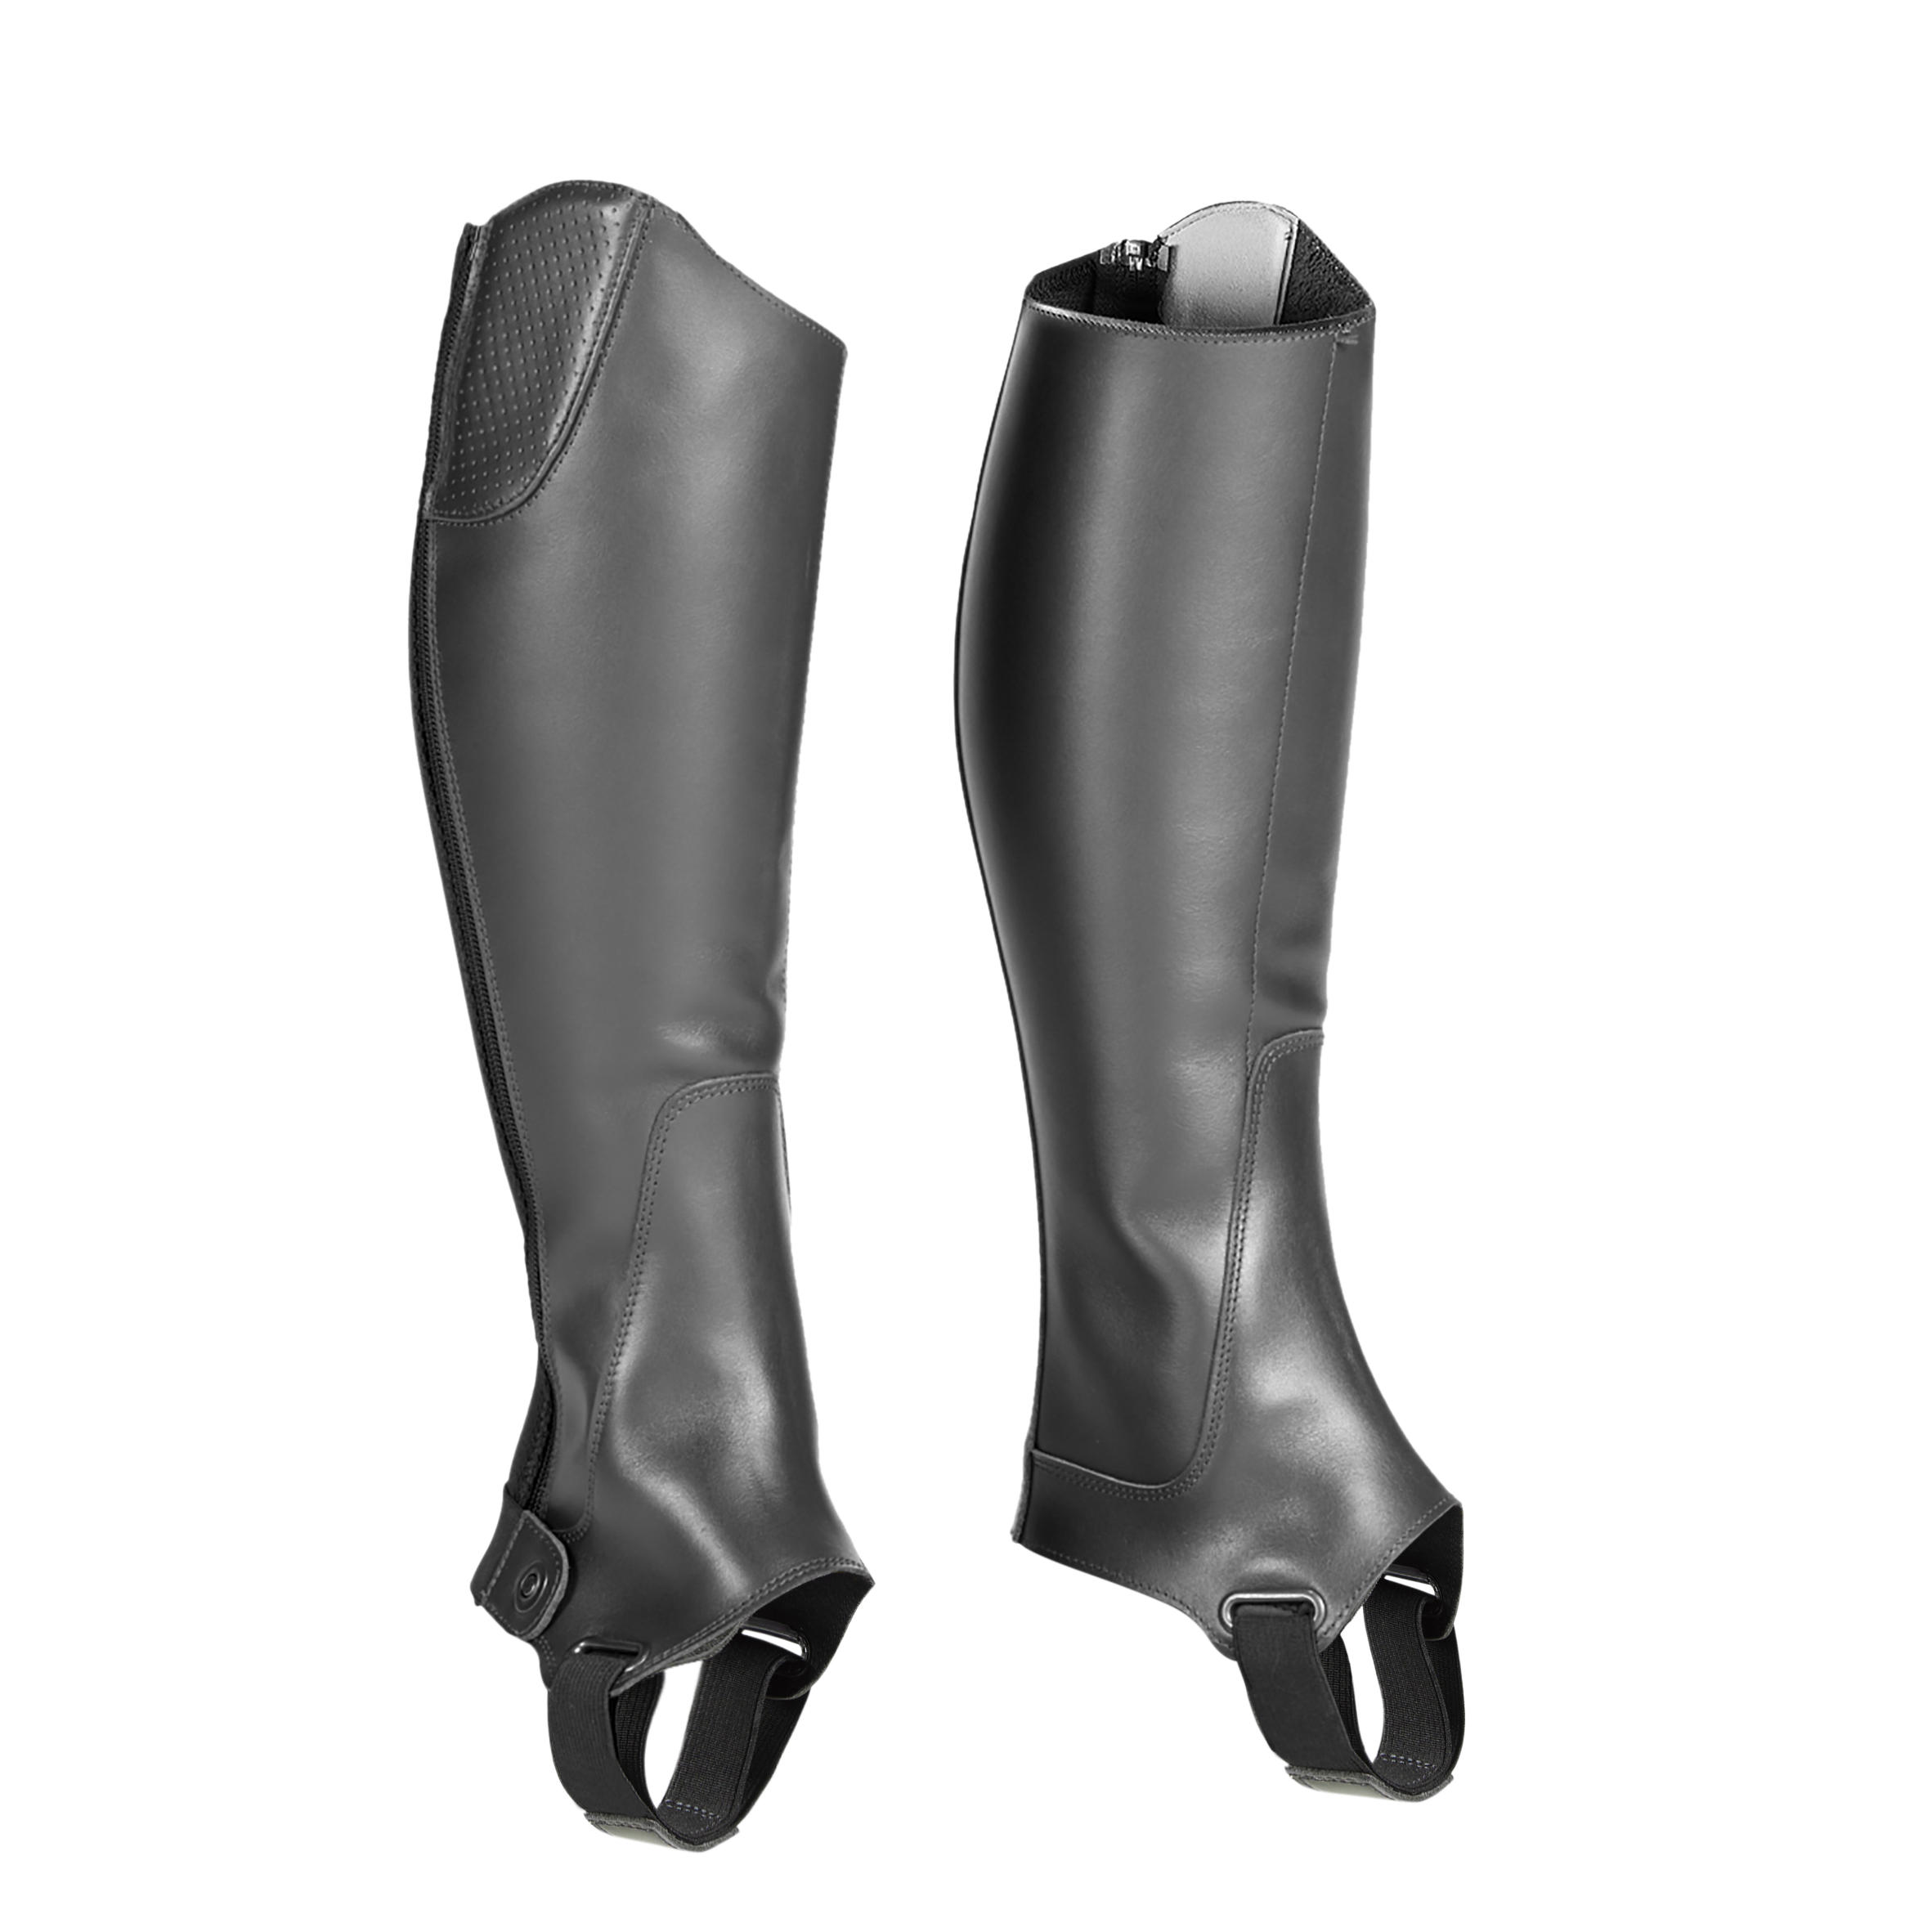 Adult Second Choice Horse Riding Leather Half-Chaps 560 - Black 4/12